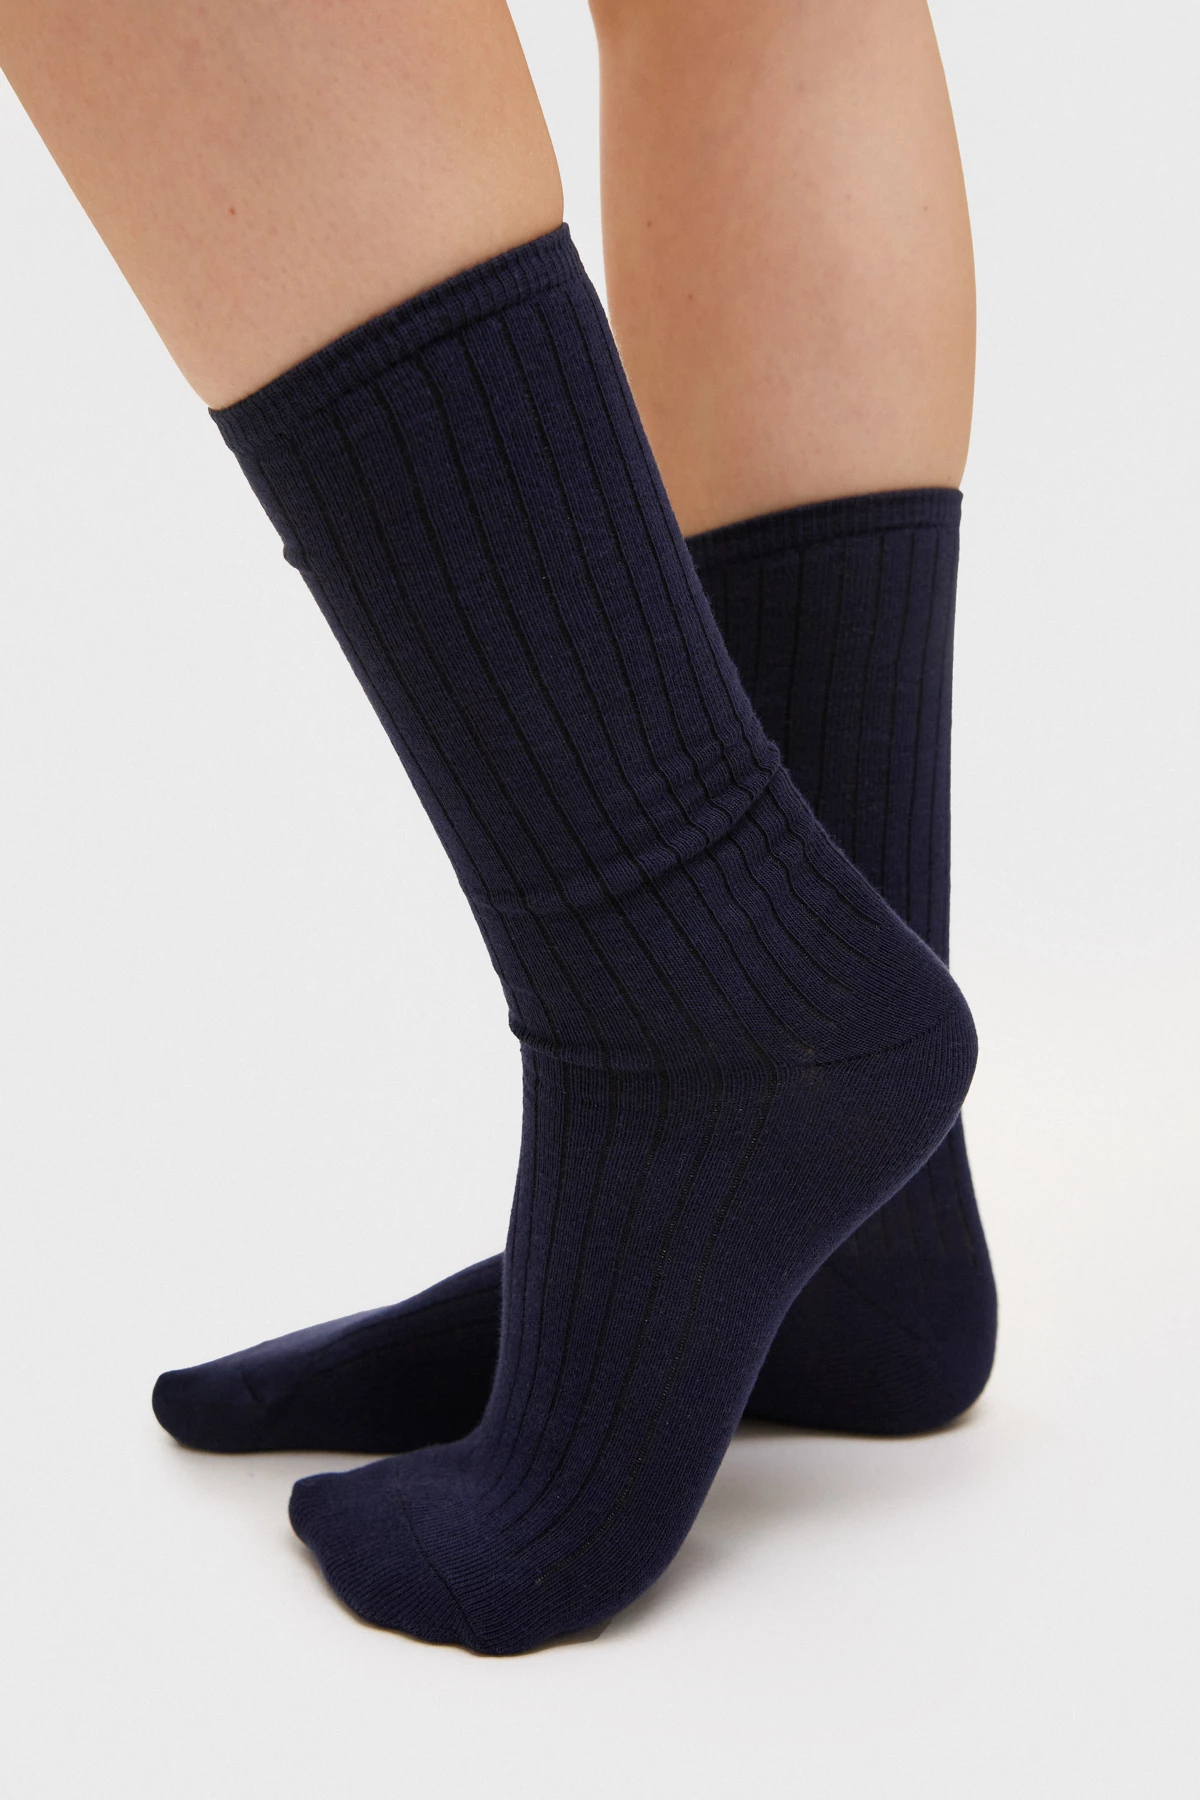 High cotton socks in navy blue color, photo 1